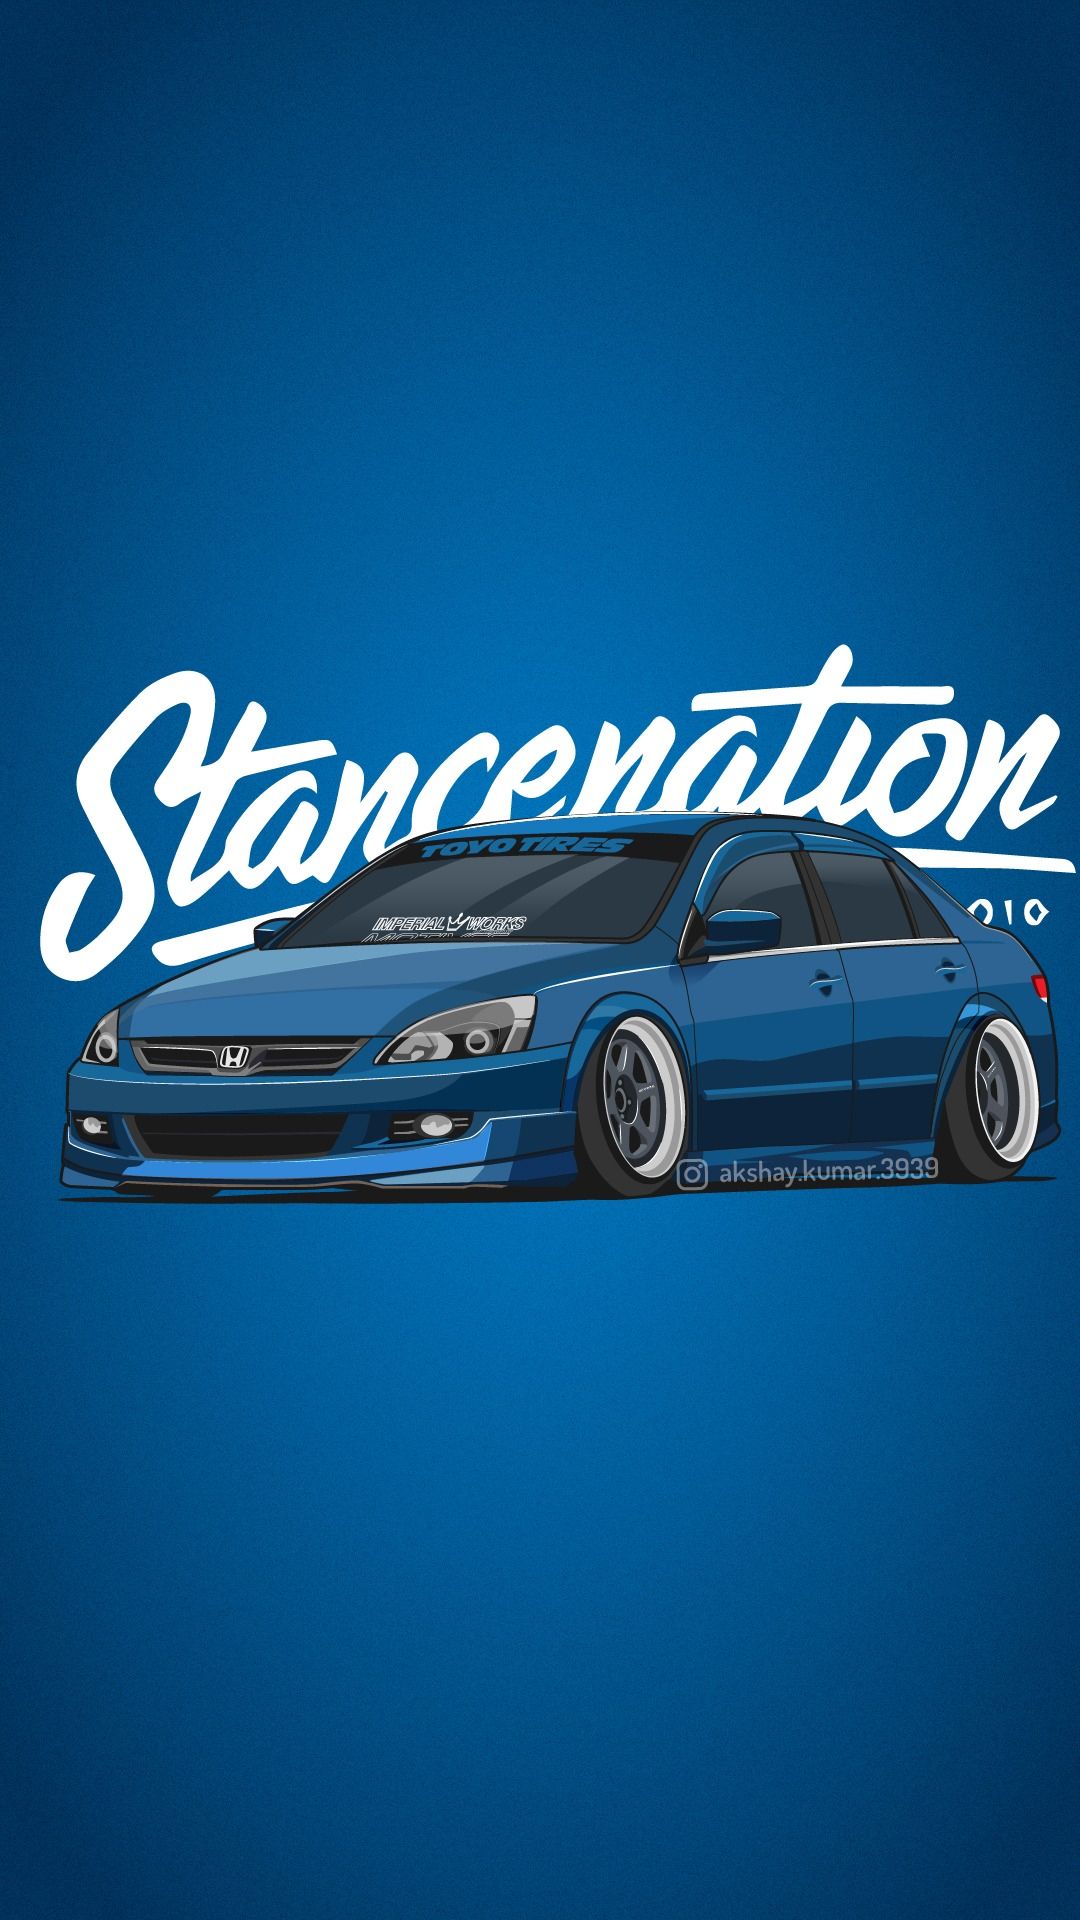 stance nation wallpapers